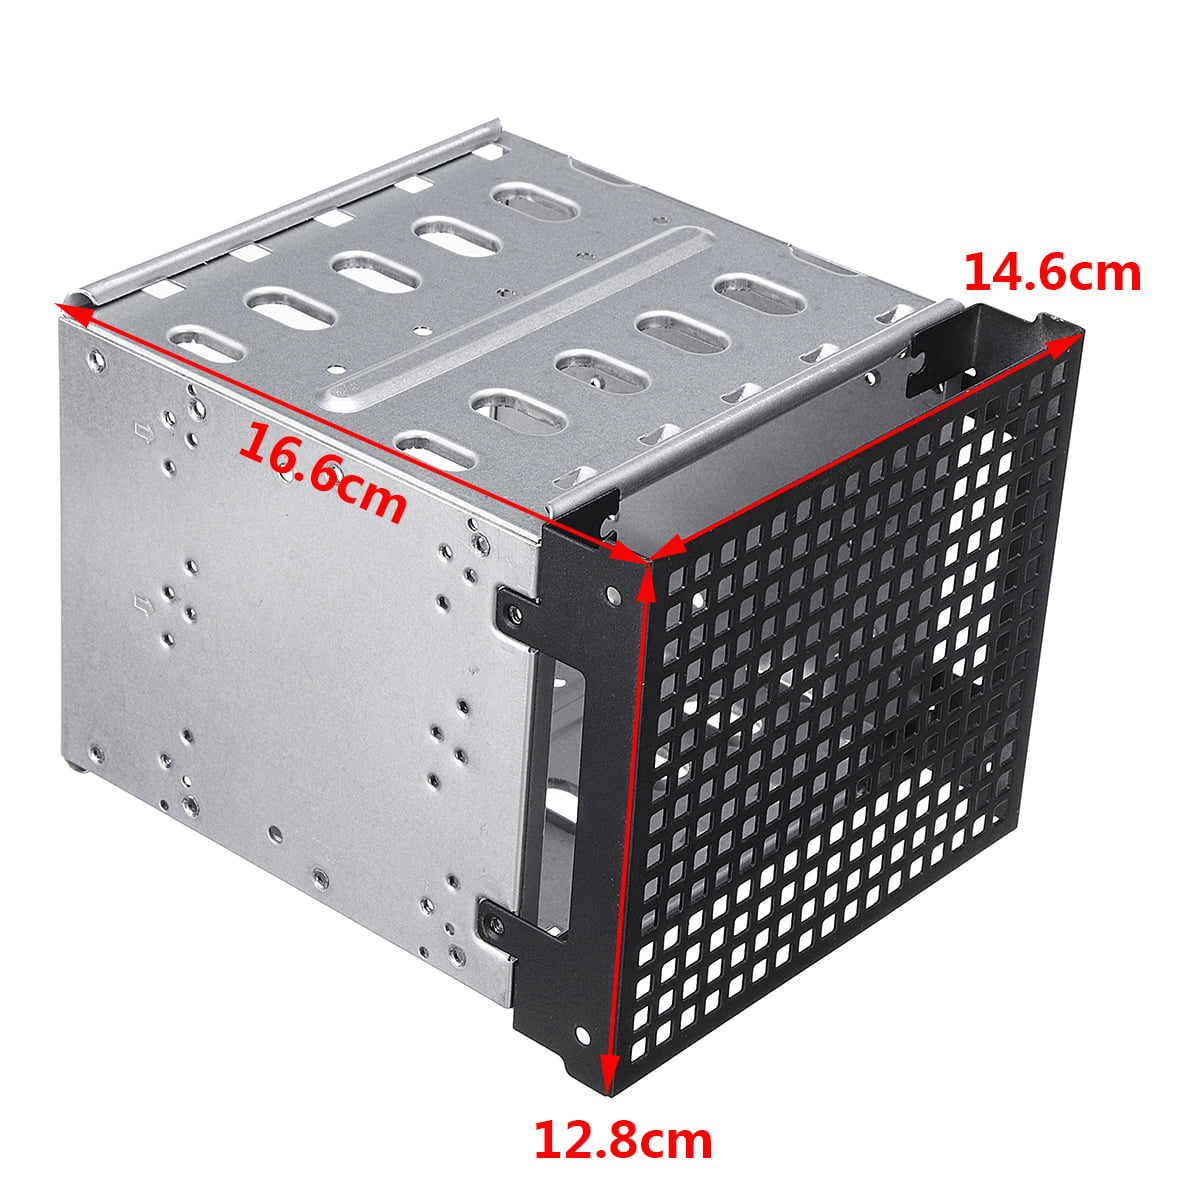 5.25" to 5x 3.5" SATA SAS HDD Cage Rack Hard Driver Tray Caddy with Fan Space 